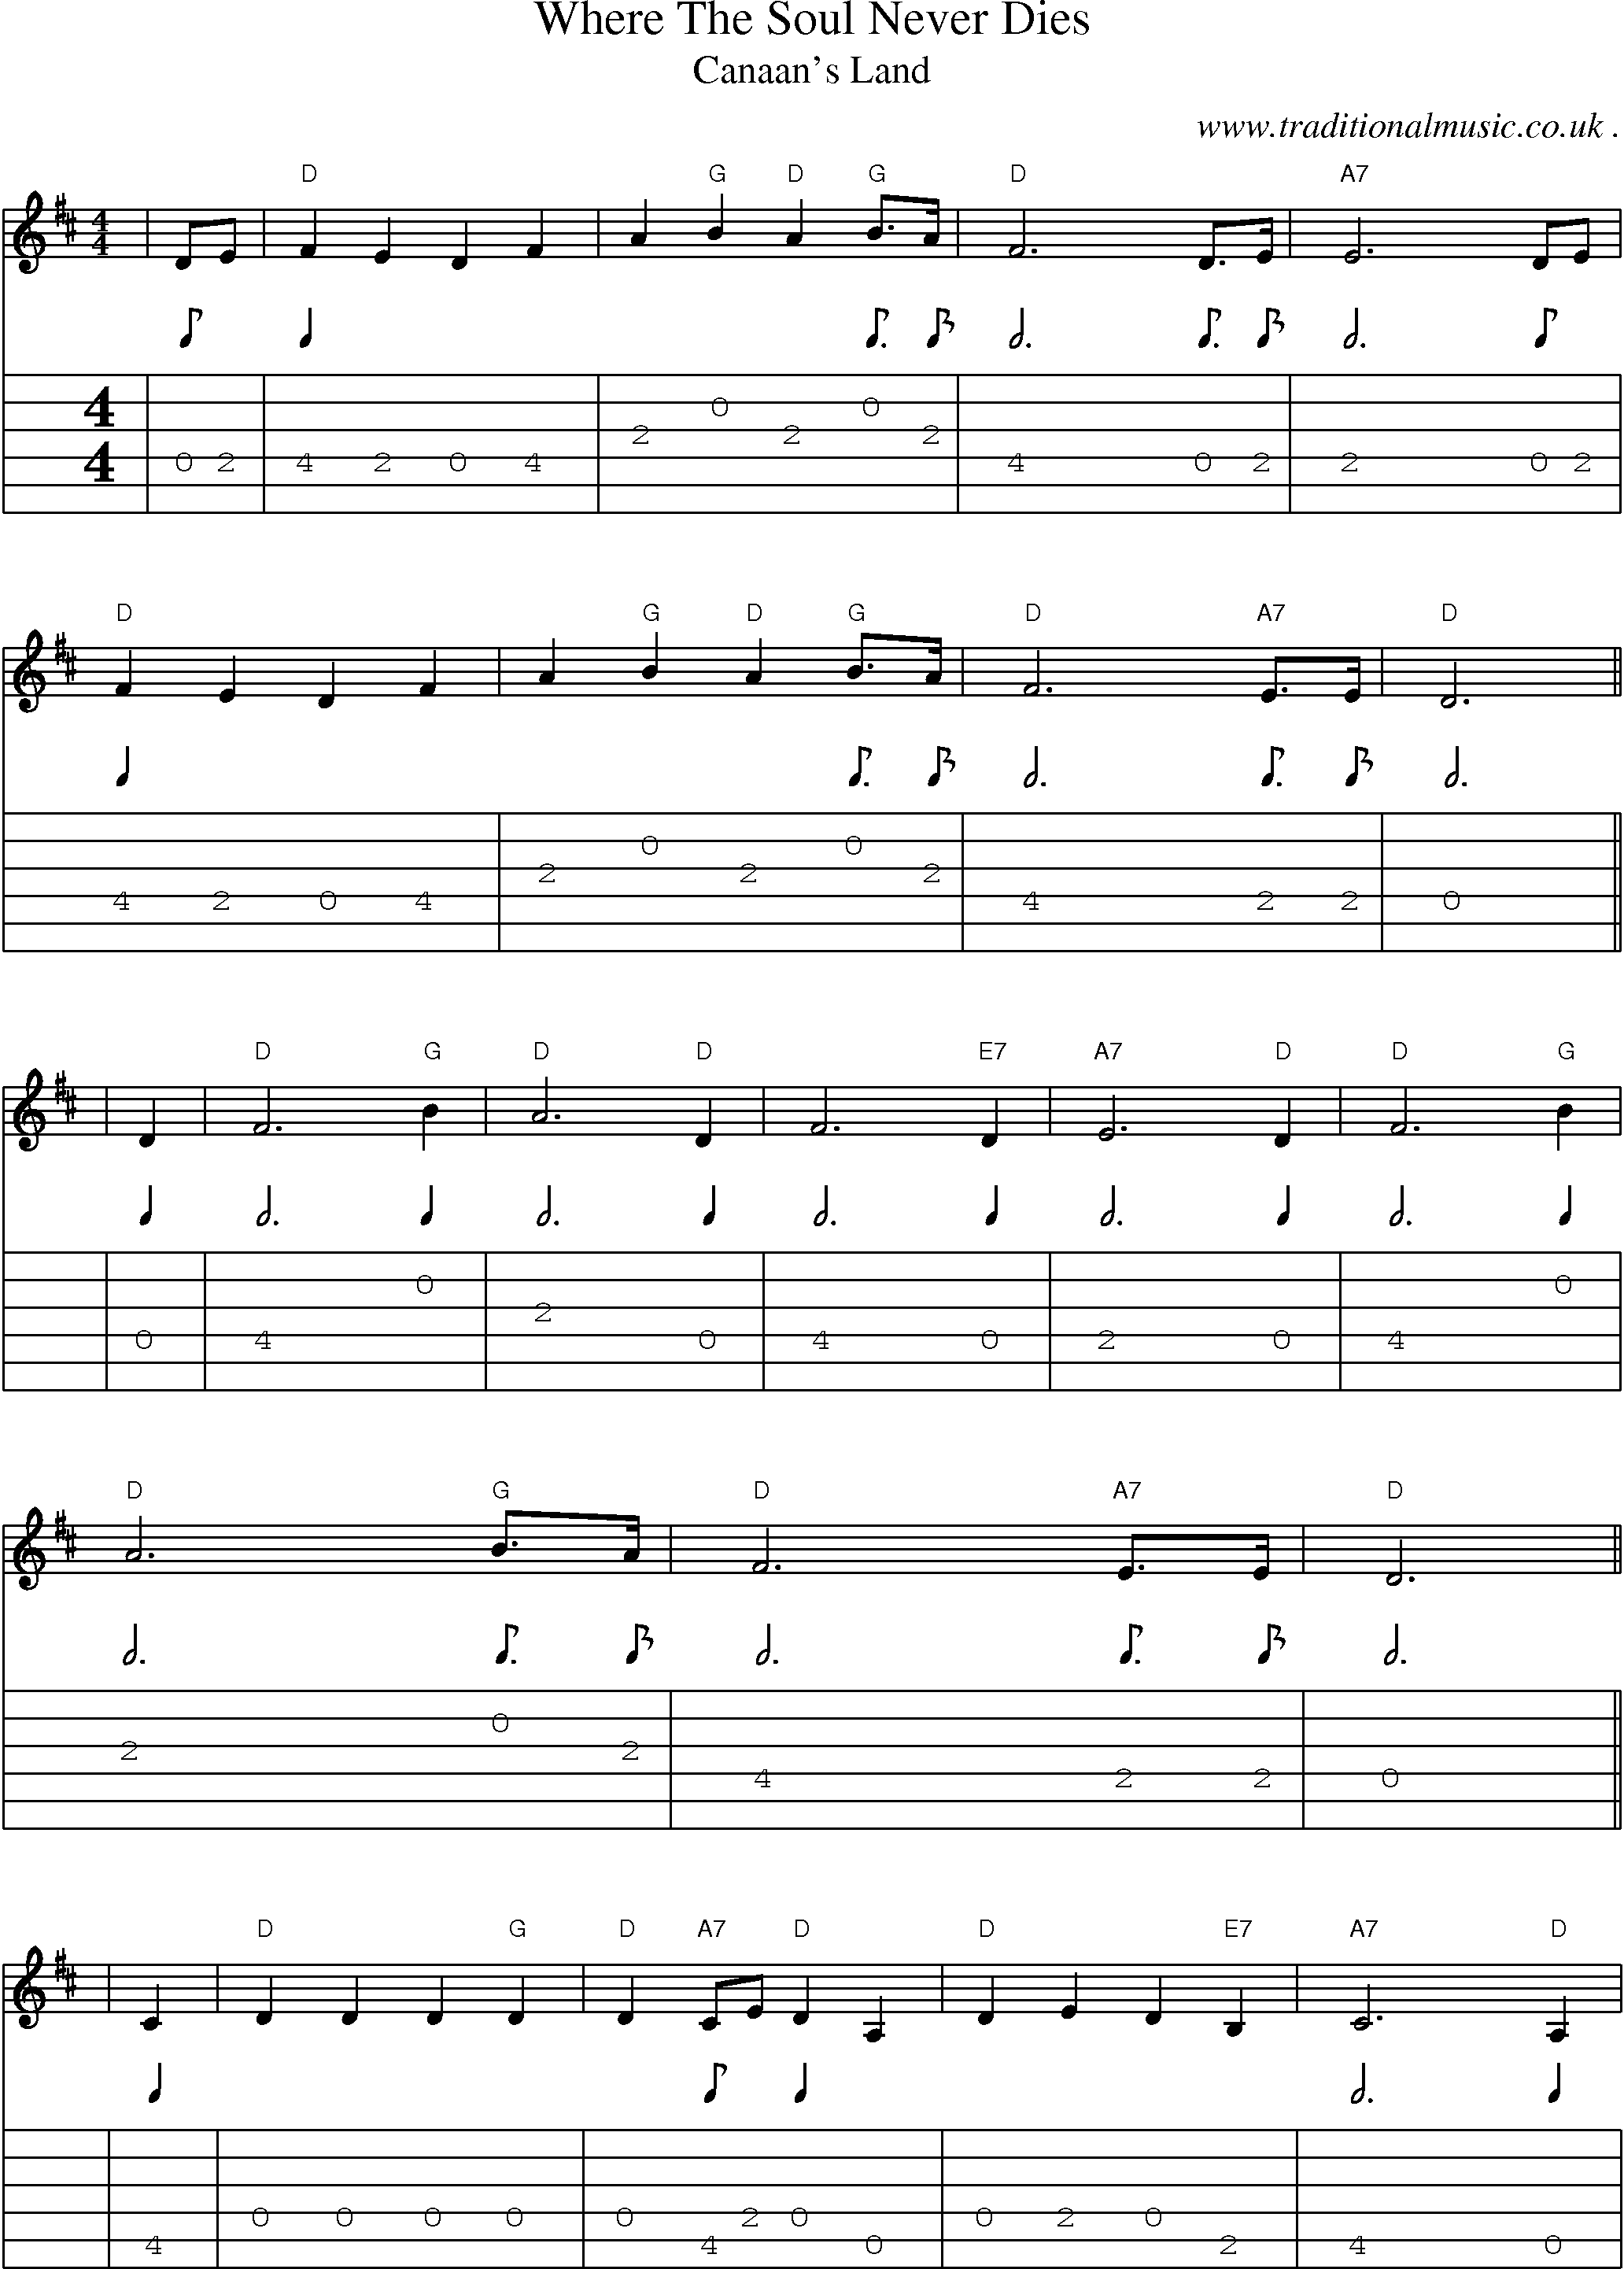 Music Score and Guitar Tabs for Where The Soul Never Dies